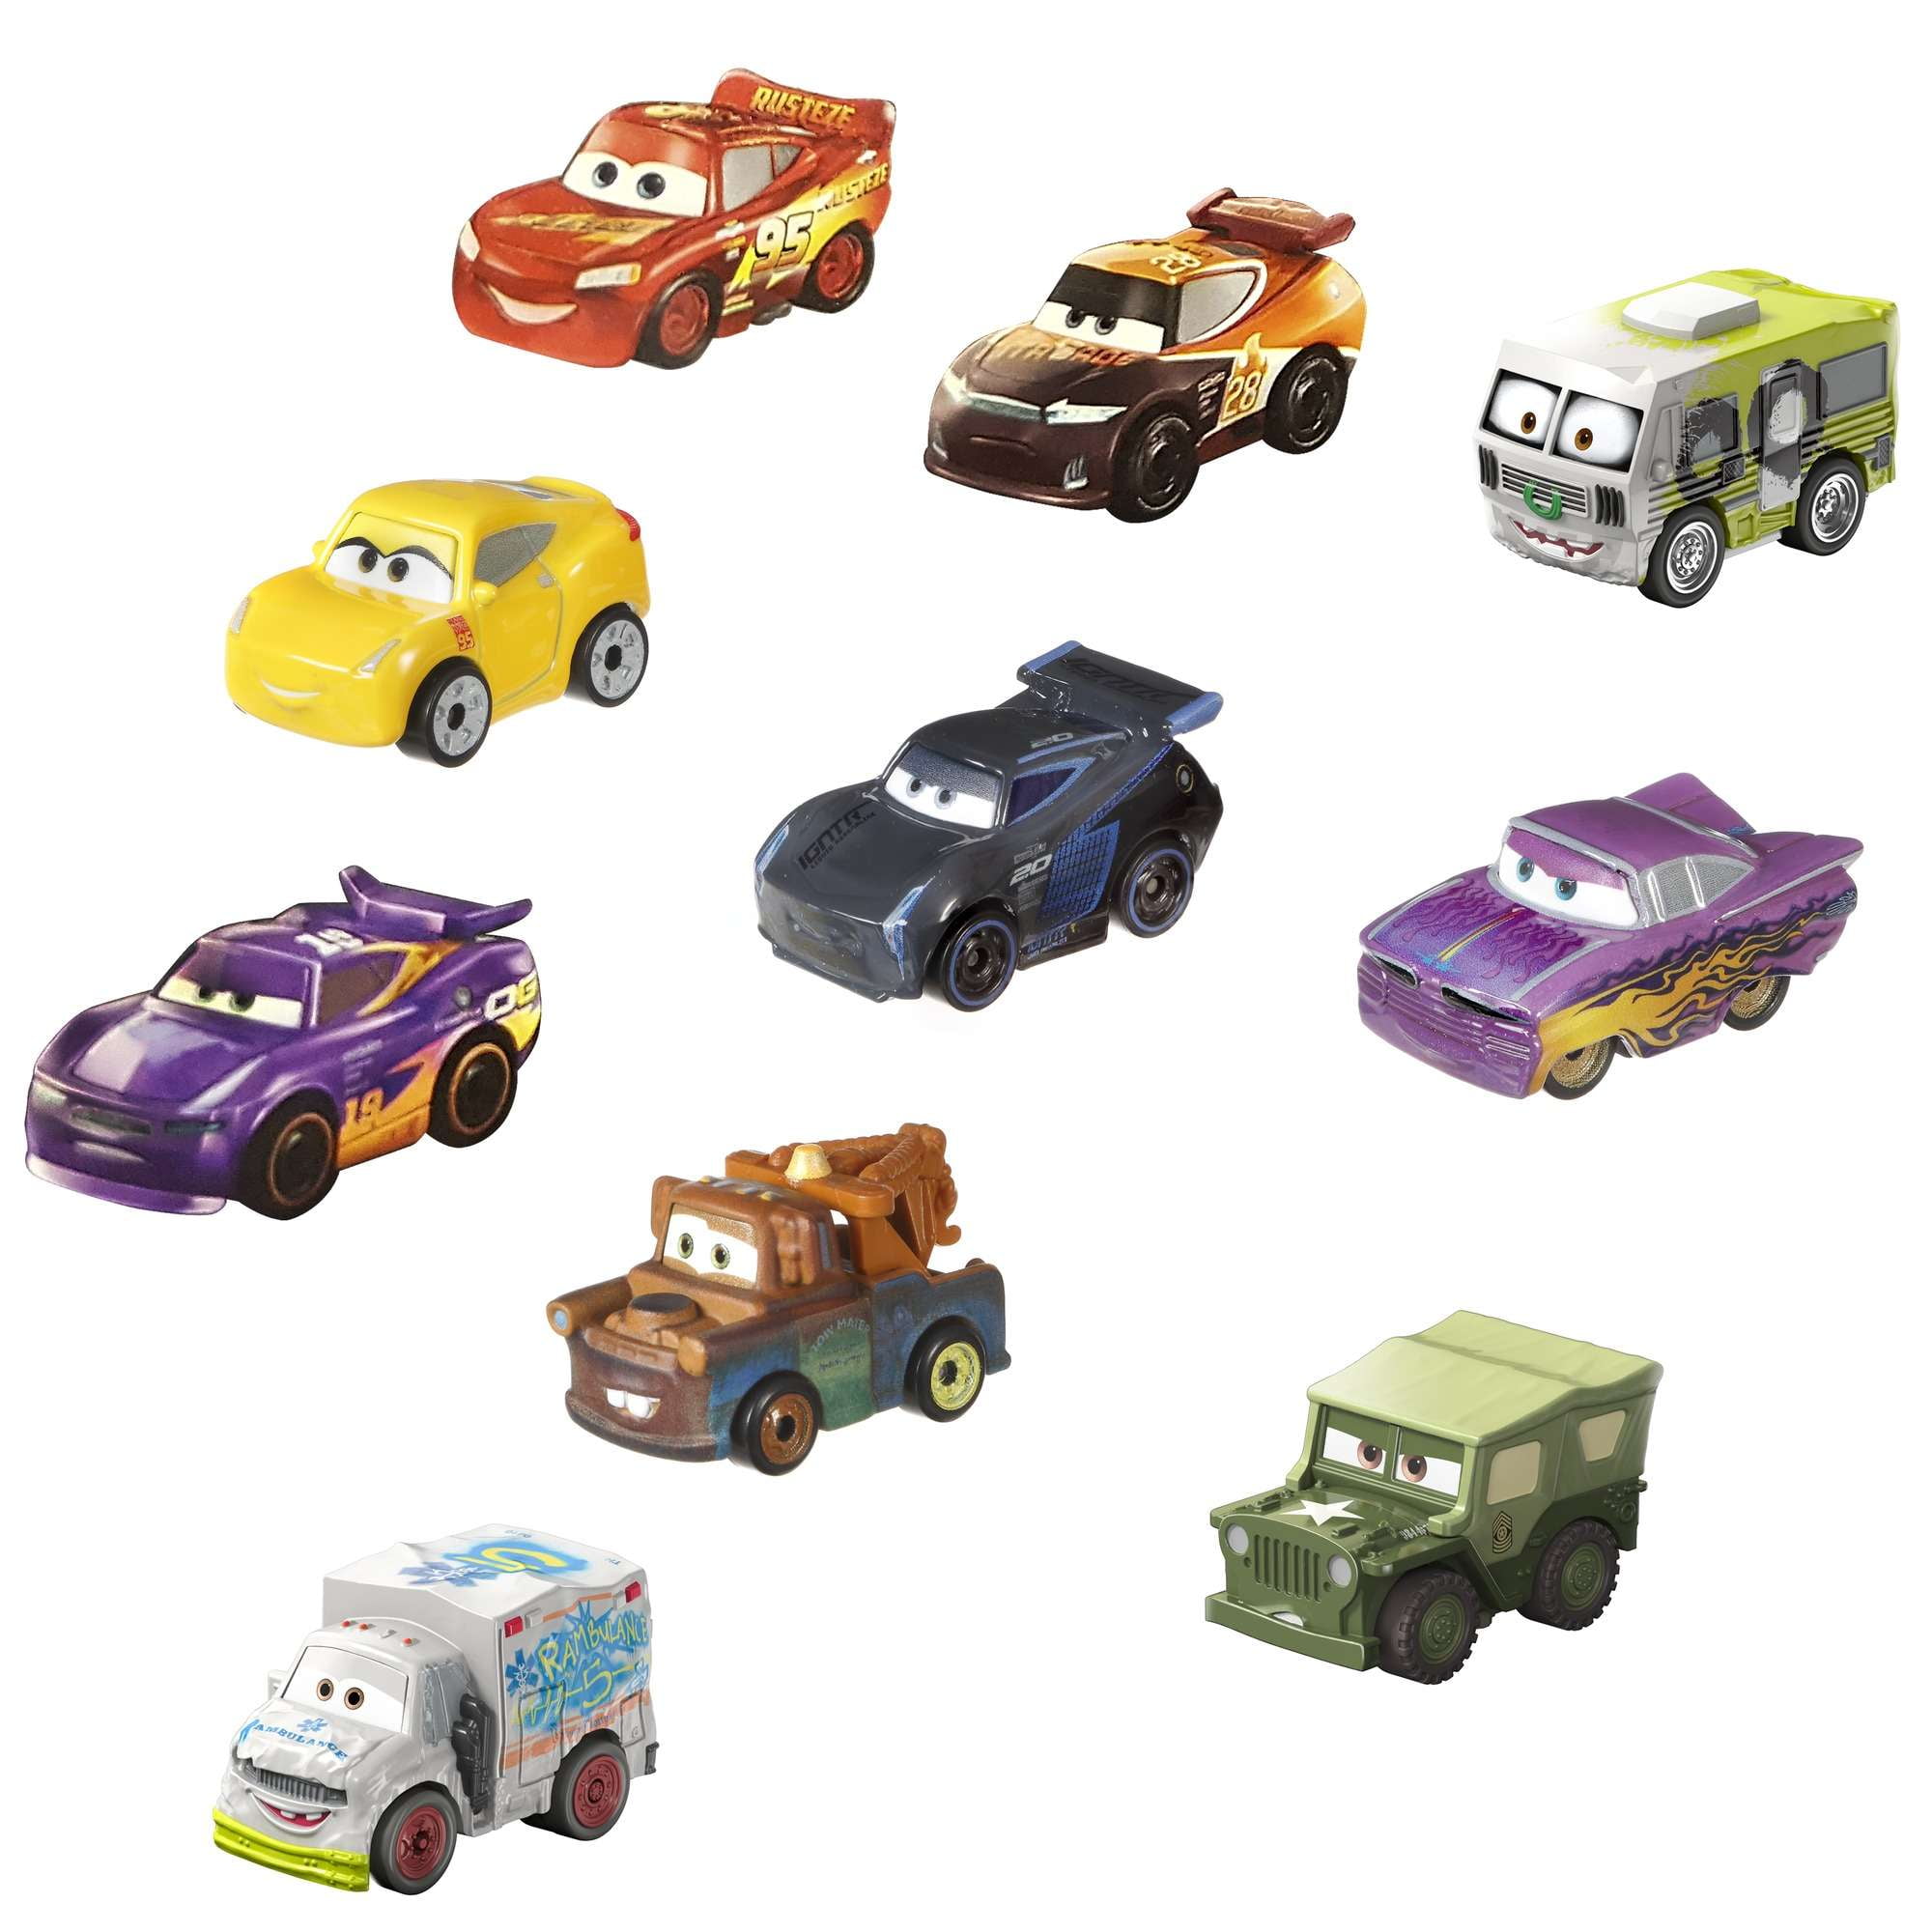 Disney Pixar Cars Die-Cast Mini Racers 10-Pack Vehicles, Miniature Racecar  Toys For Racing, Small, Portable, Collectible Automobile Toys Based on Cars